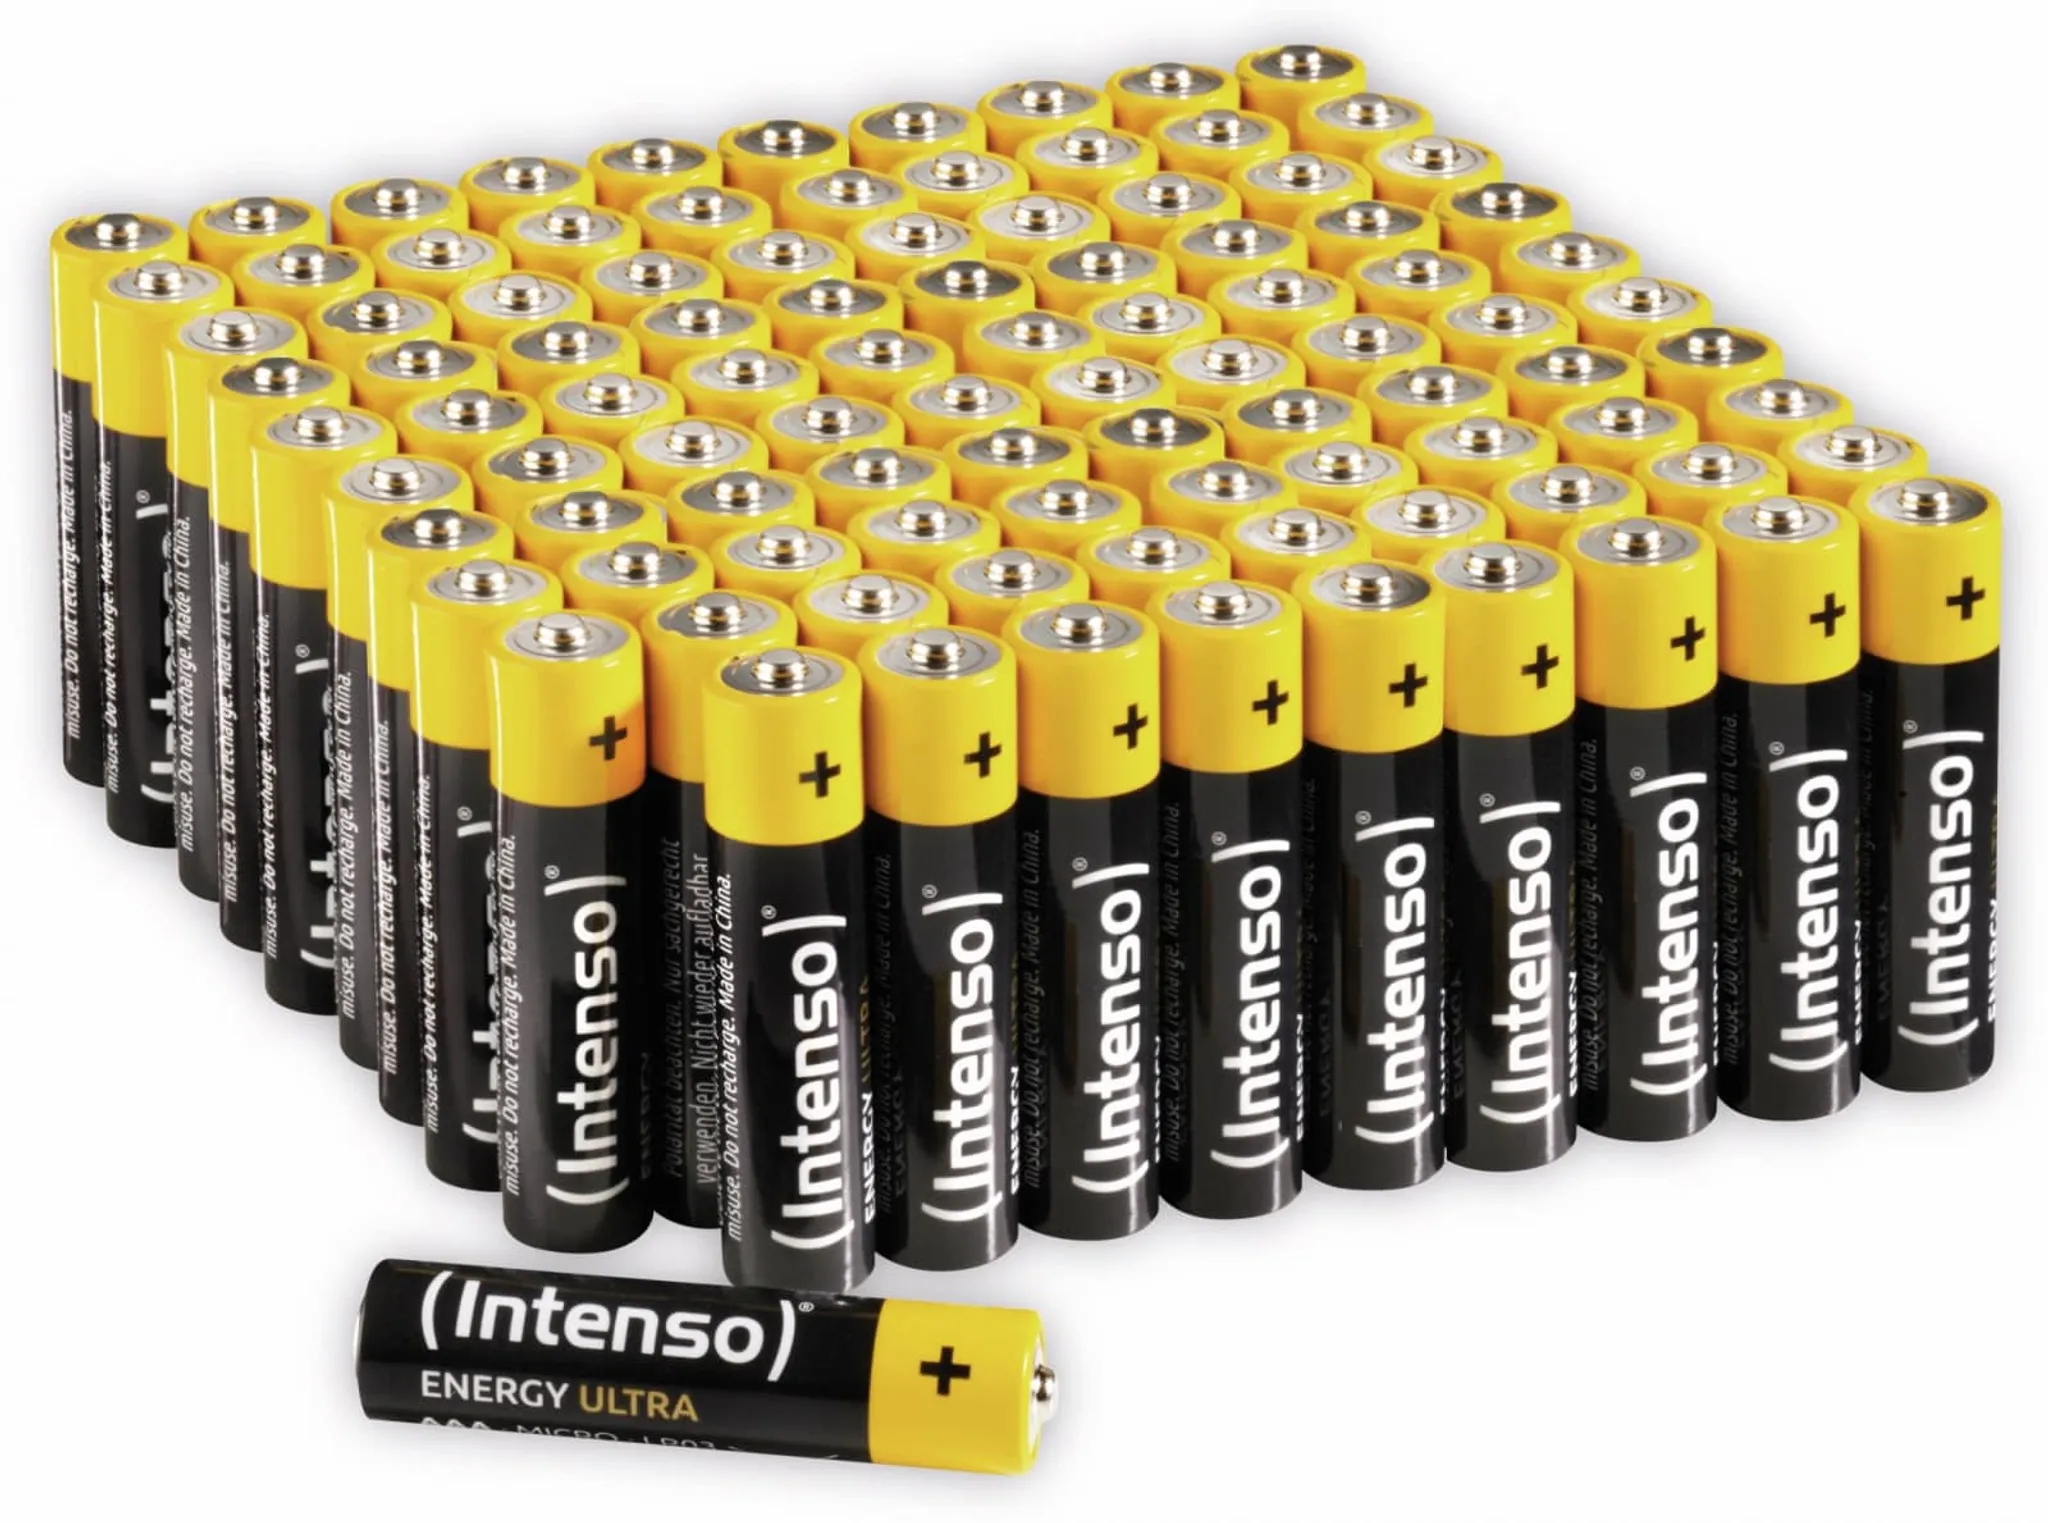 INTENSO Micro-Batterie Energy Ultra, AAA